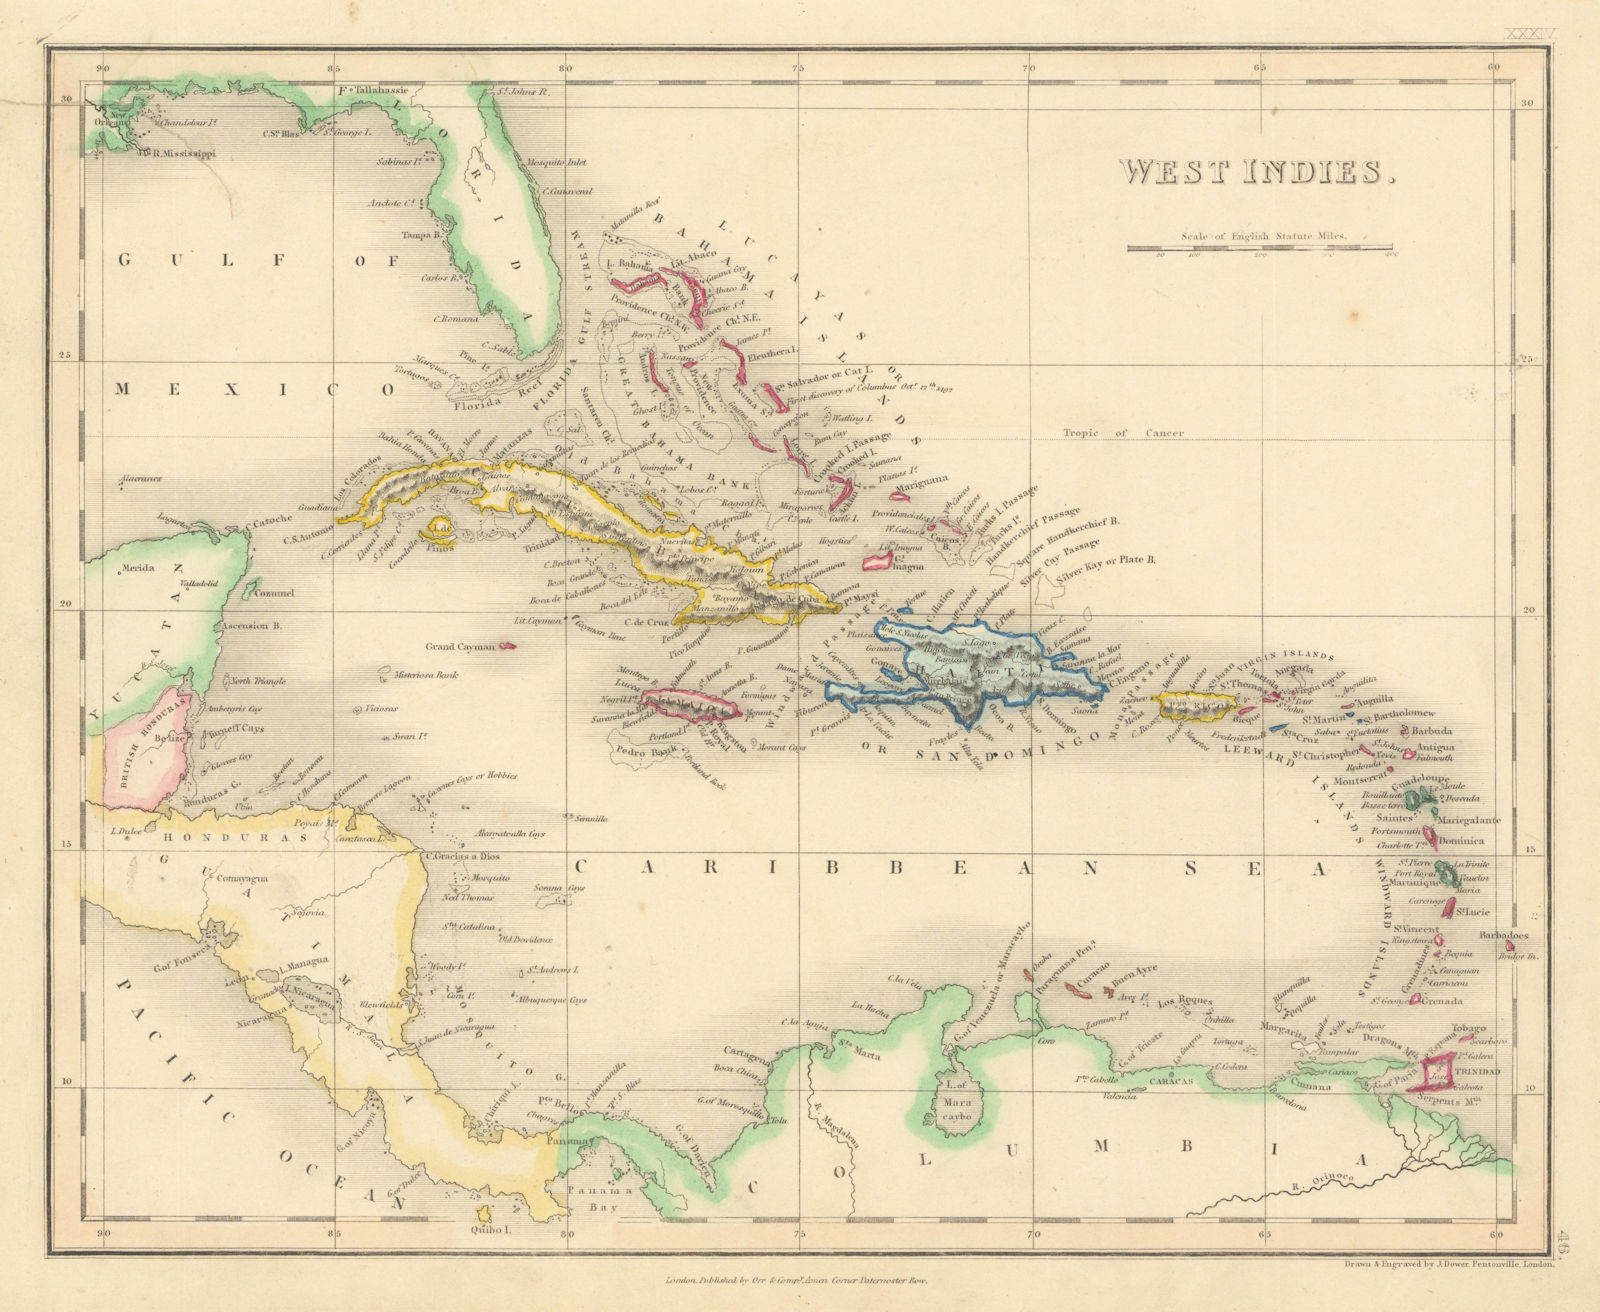 West Indies by John Dower. Caribbean Antilles 1845 old antique map plan chart